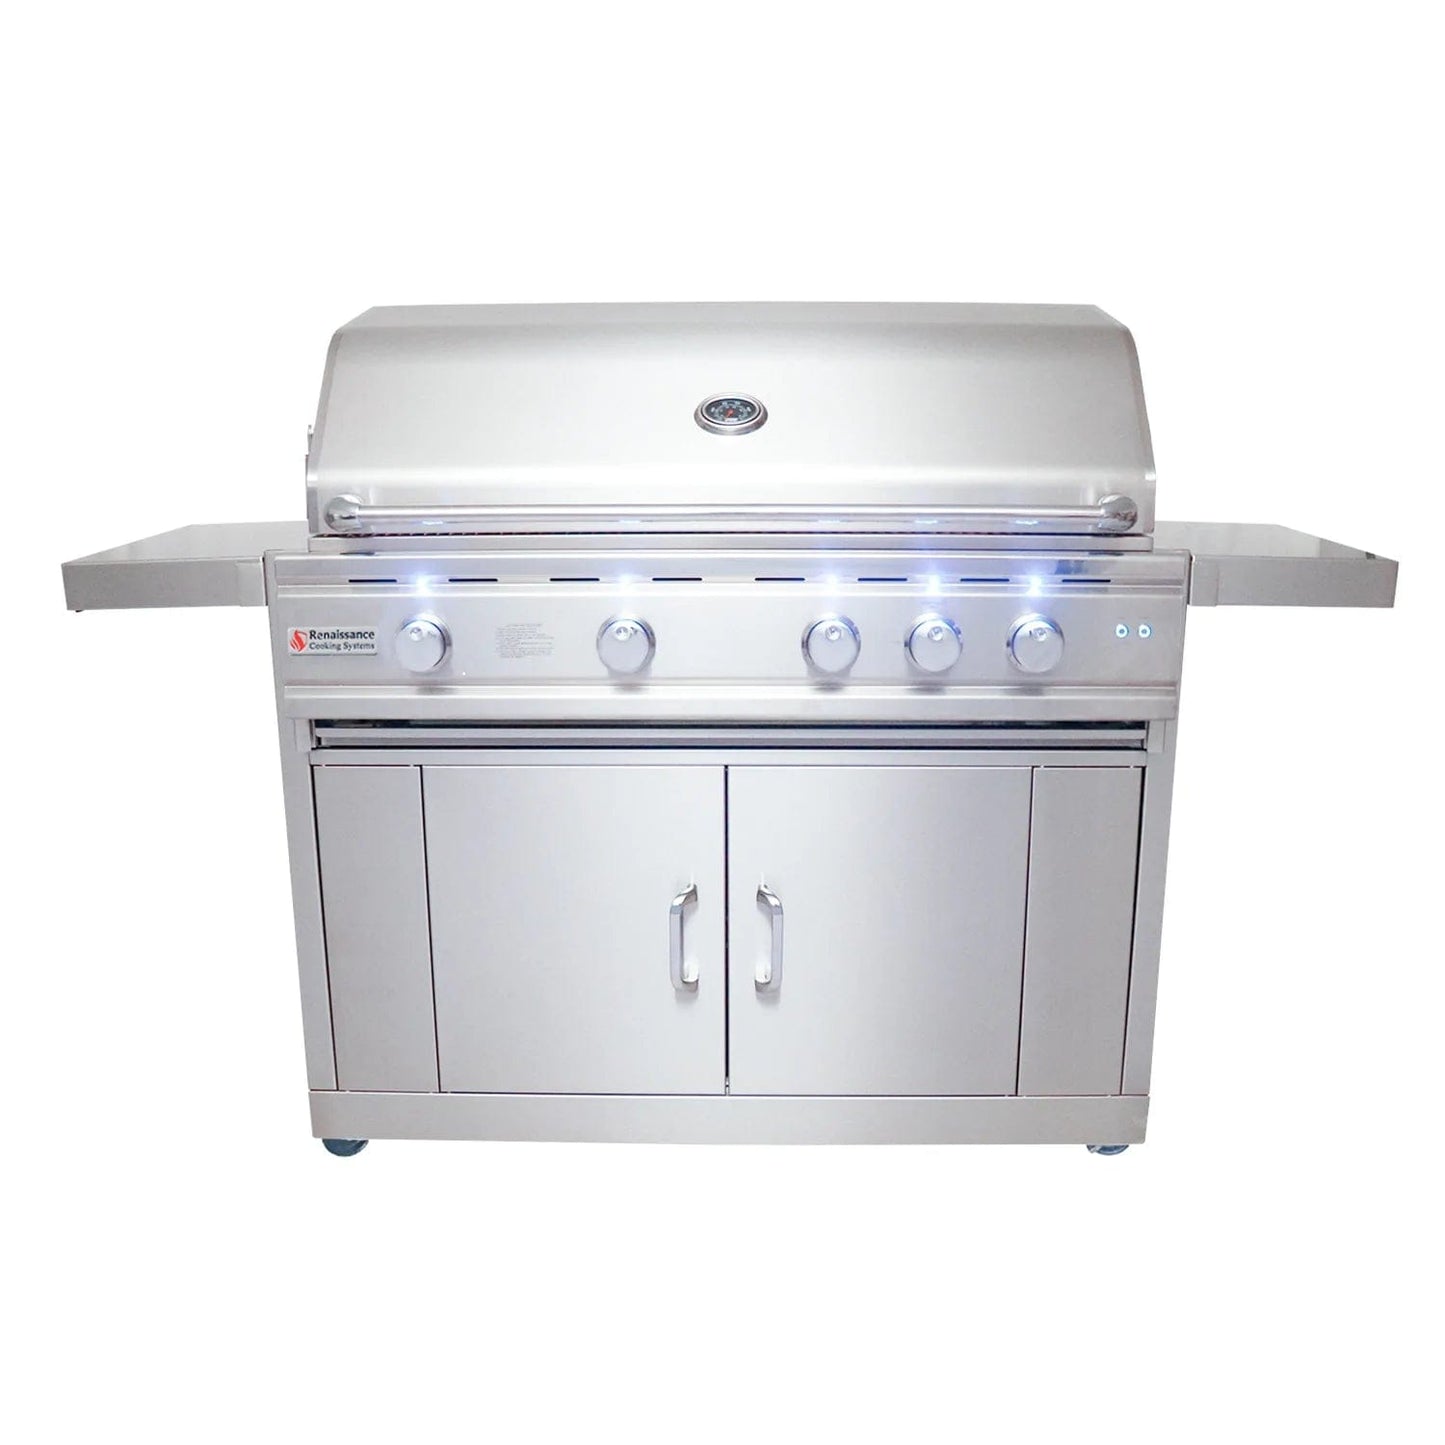 The Renaissance Cooking Systems - 42" Cutlass Pro Series Portable Grill - Kitchen King Direct